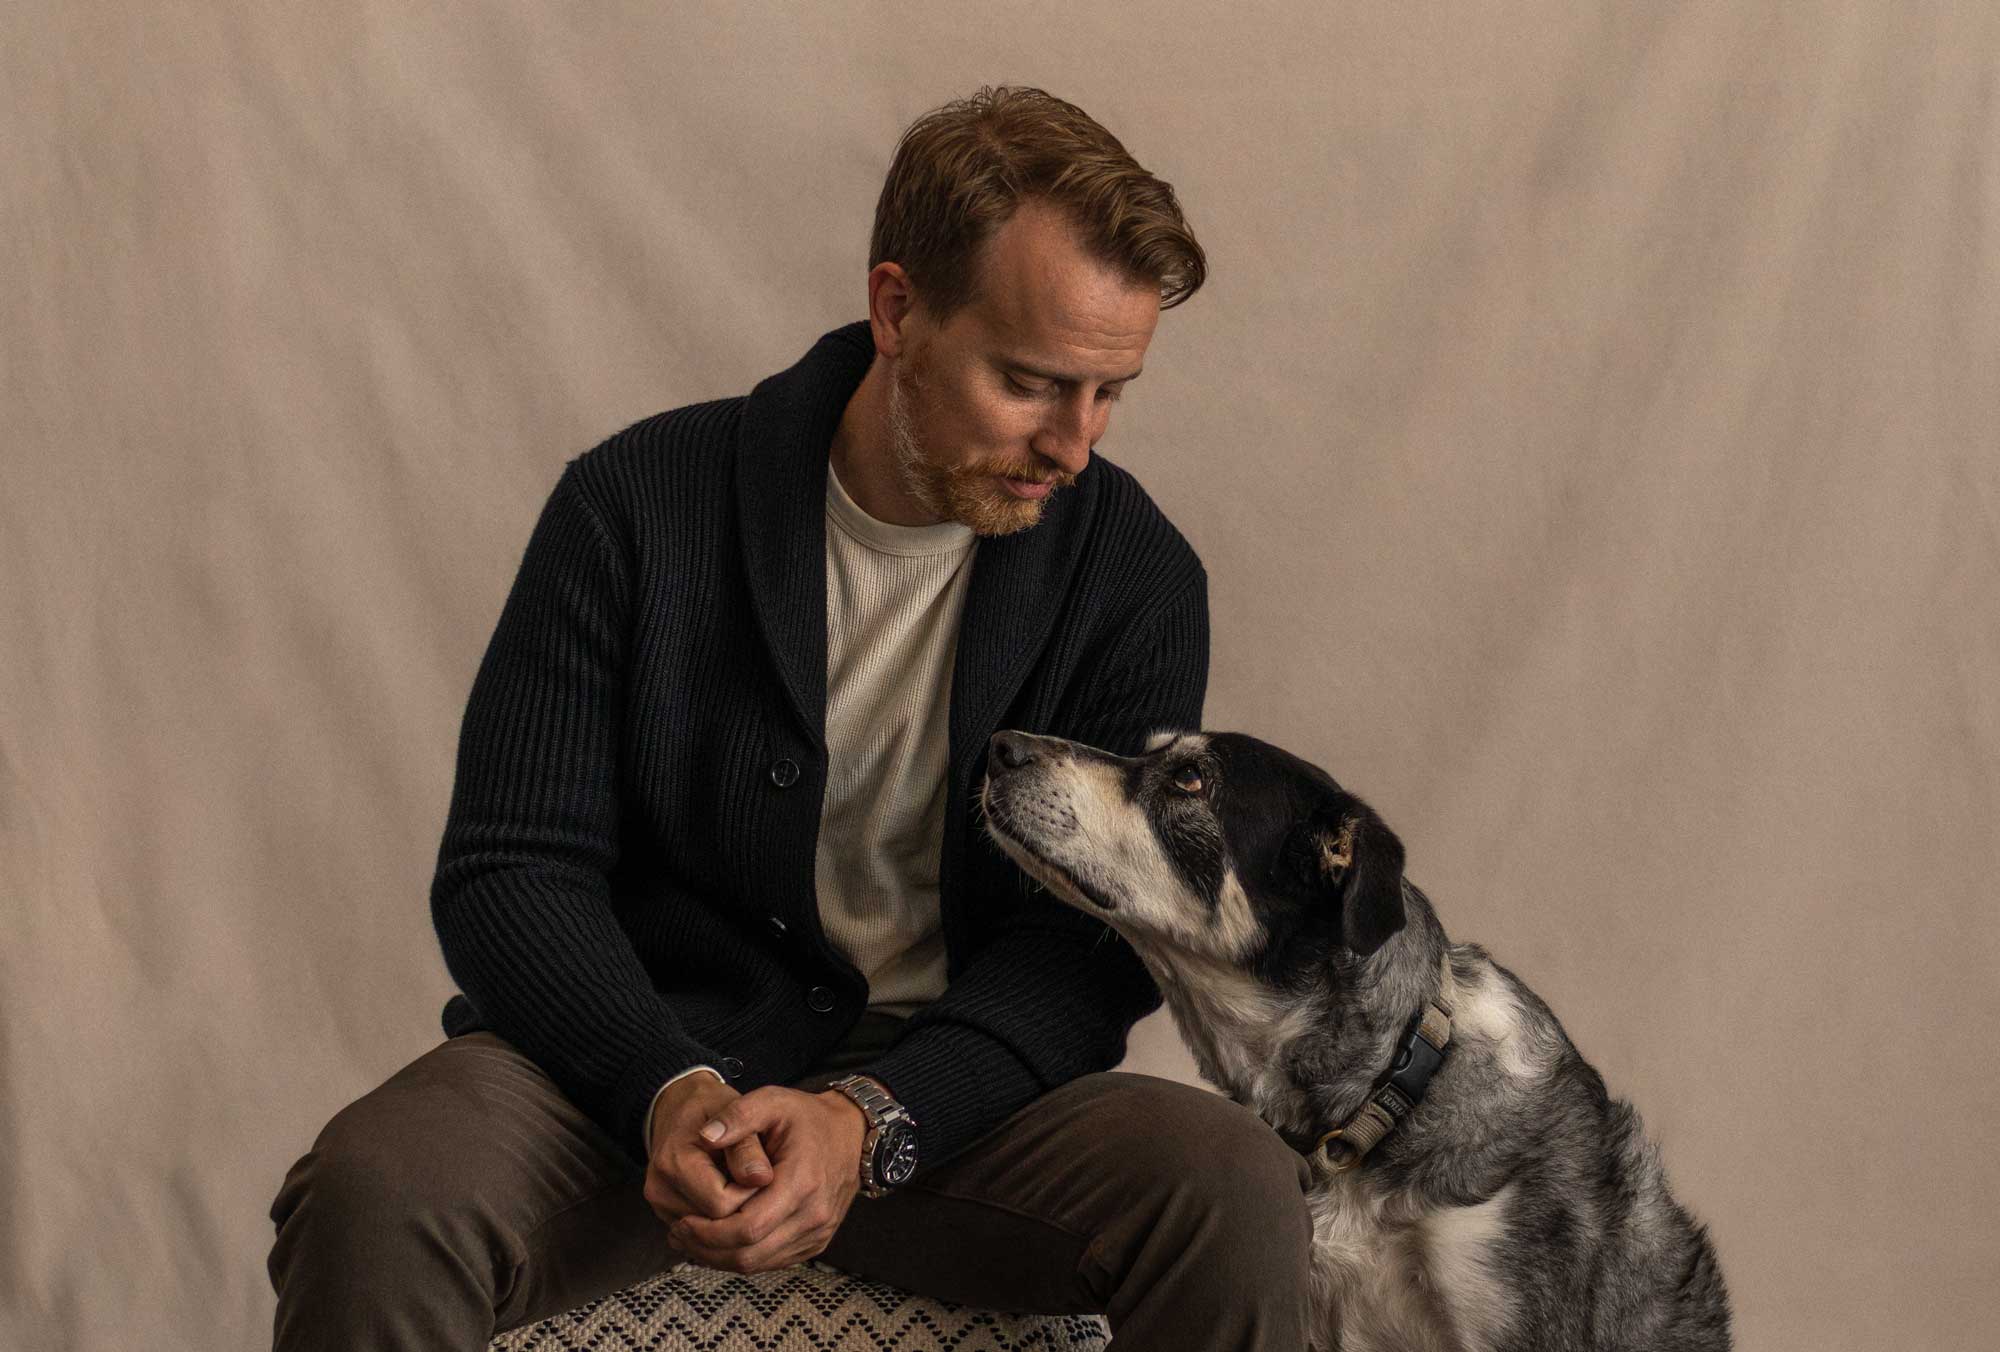 Andrew Snavely with dog